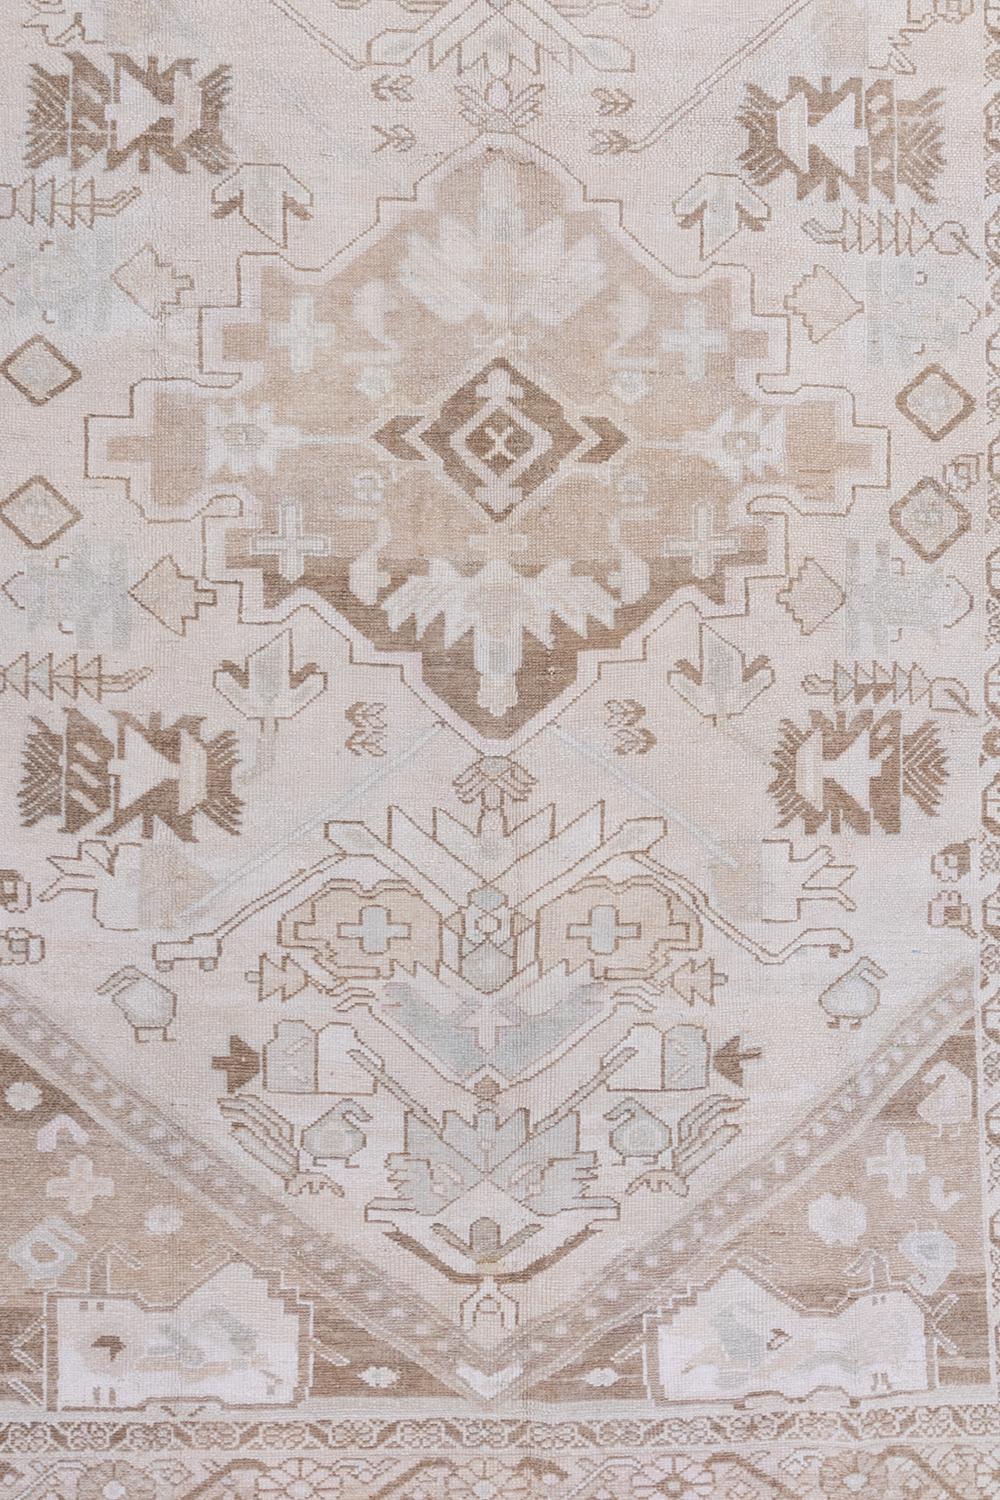 Colors: off white, tan, blush, gray-blue

Pile: medium

Excellent as a layering piece or on its own, this monochromatic vintage Anatolian rug has a lovely soft pile and sturdy heavy handle. Perfectly neutral with subtle warmth.

Wear Notes: 1